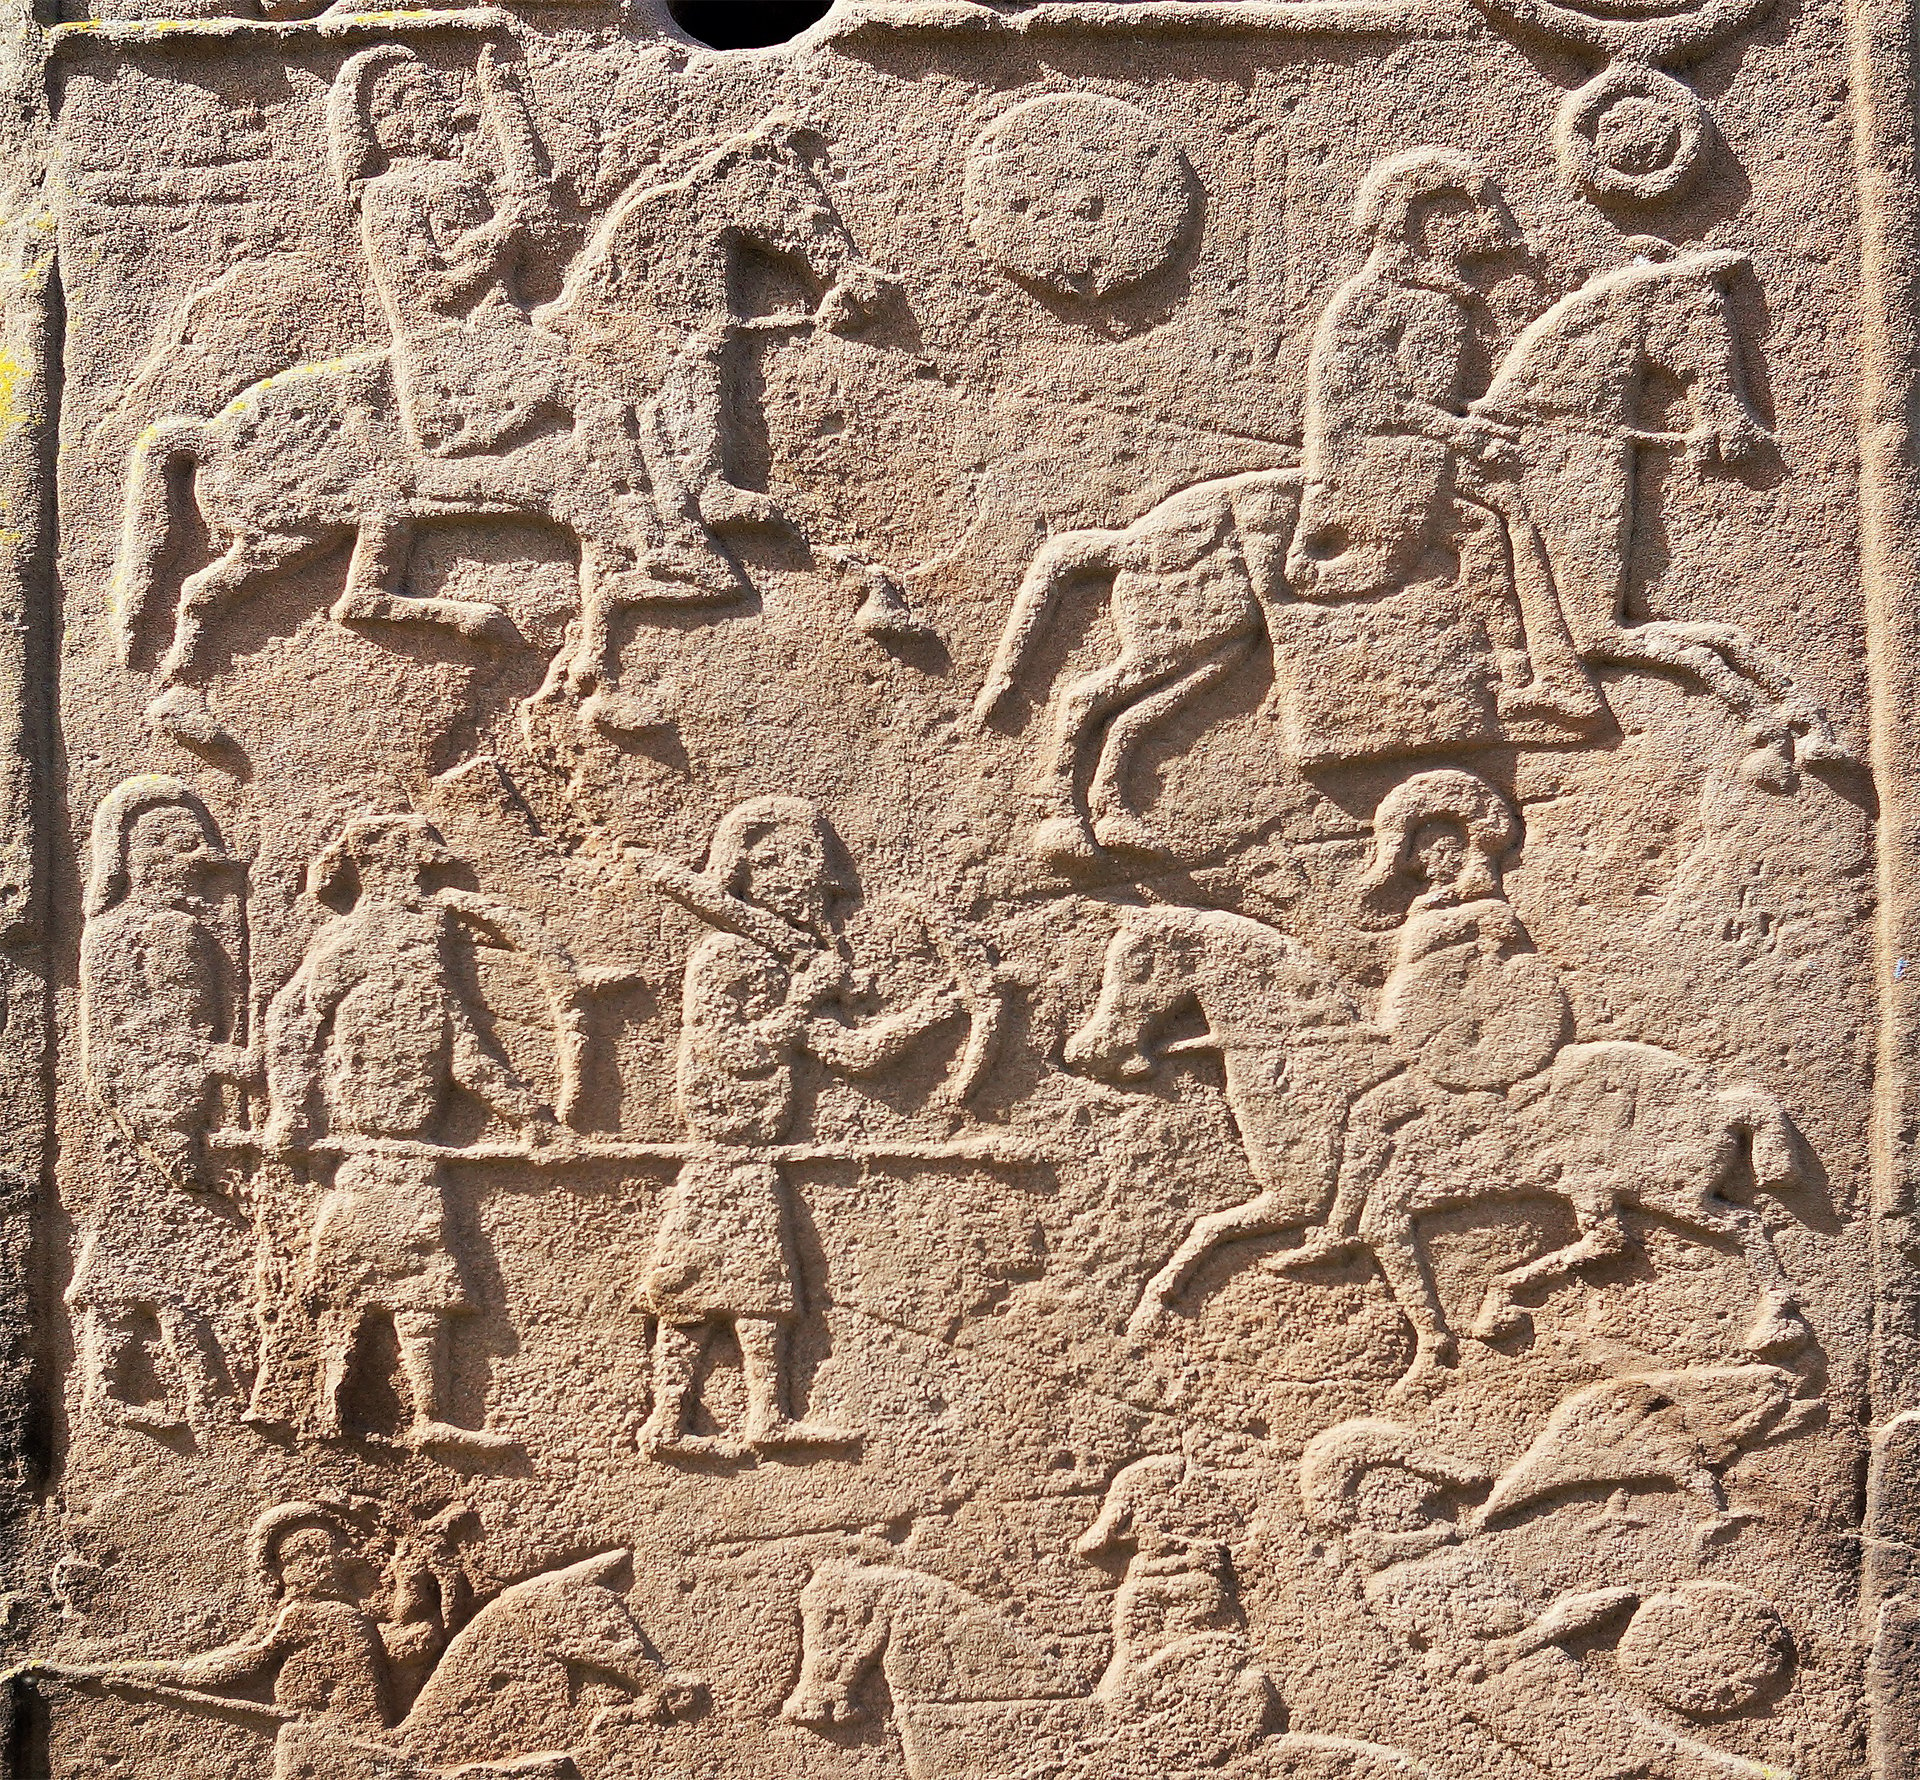 A photograph of a Pictish stone relief carving. The carving depicts a battle scene between the Picts and the Northumbrians in the 7th century. The carving shows horses and soldiers with helmets, shields, and spears.